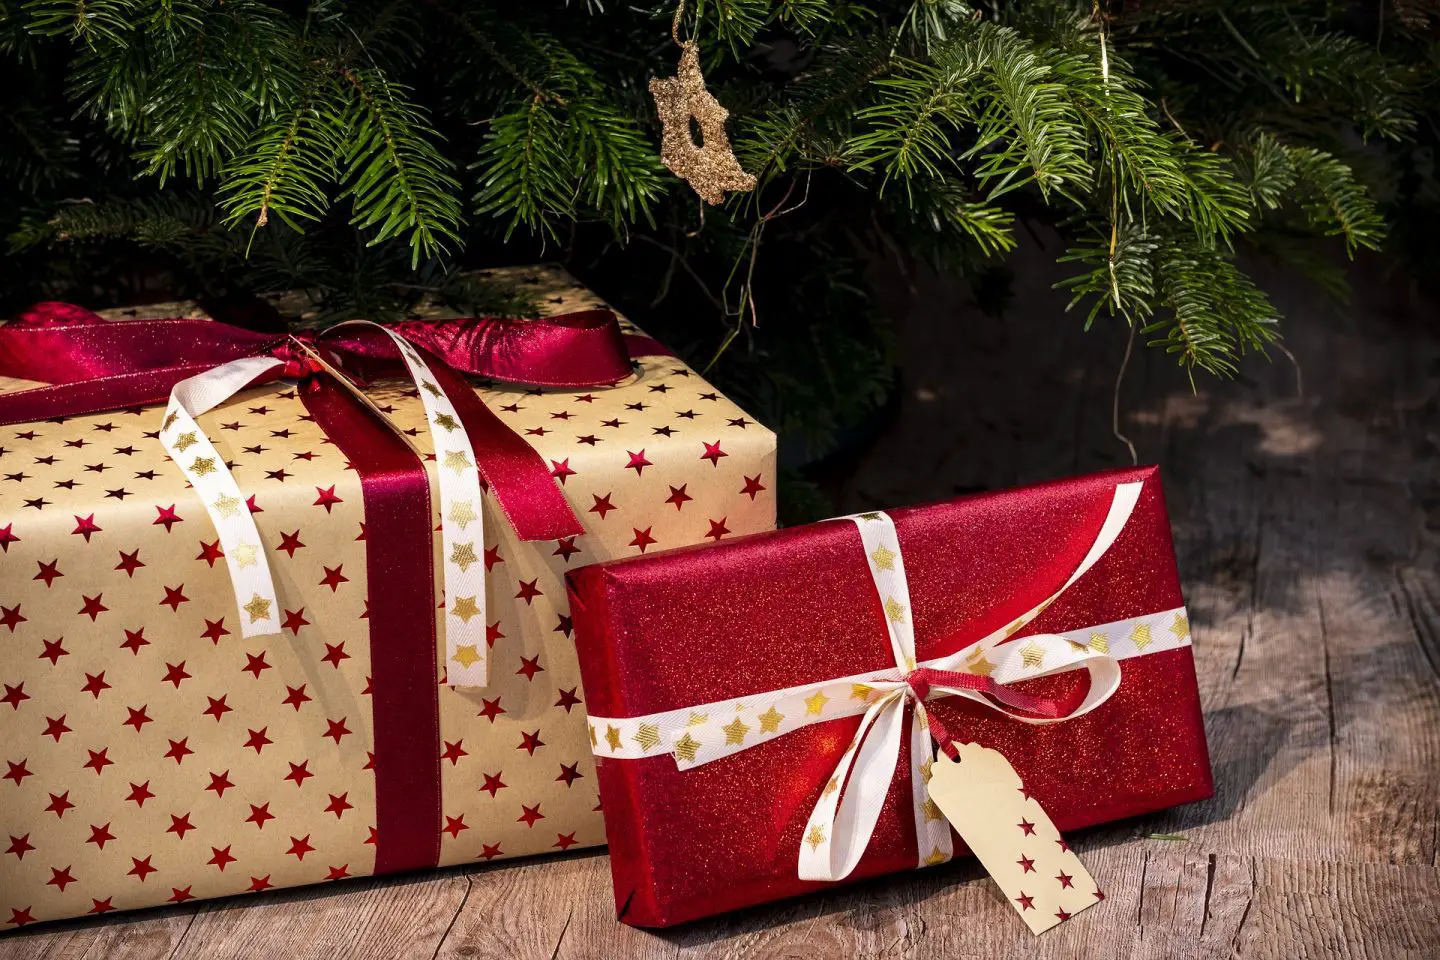 2 Christmas presents under the tree wrapped in red and gold wrapping paper